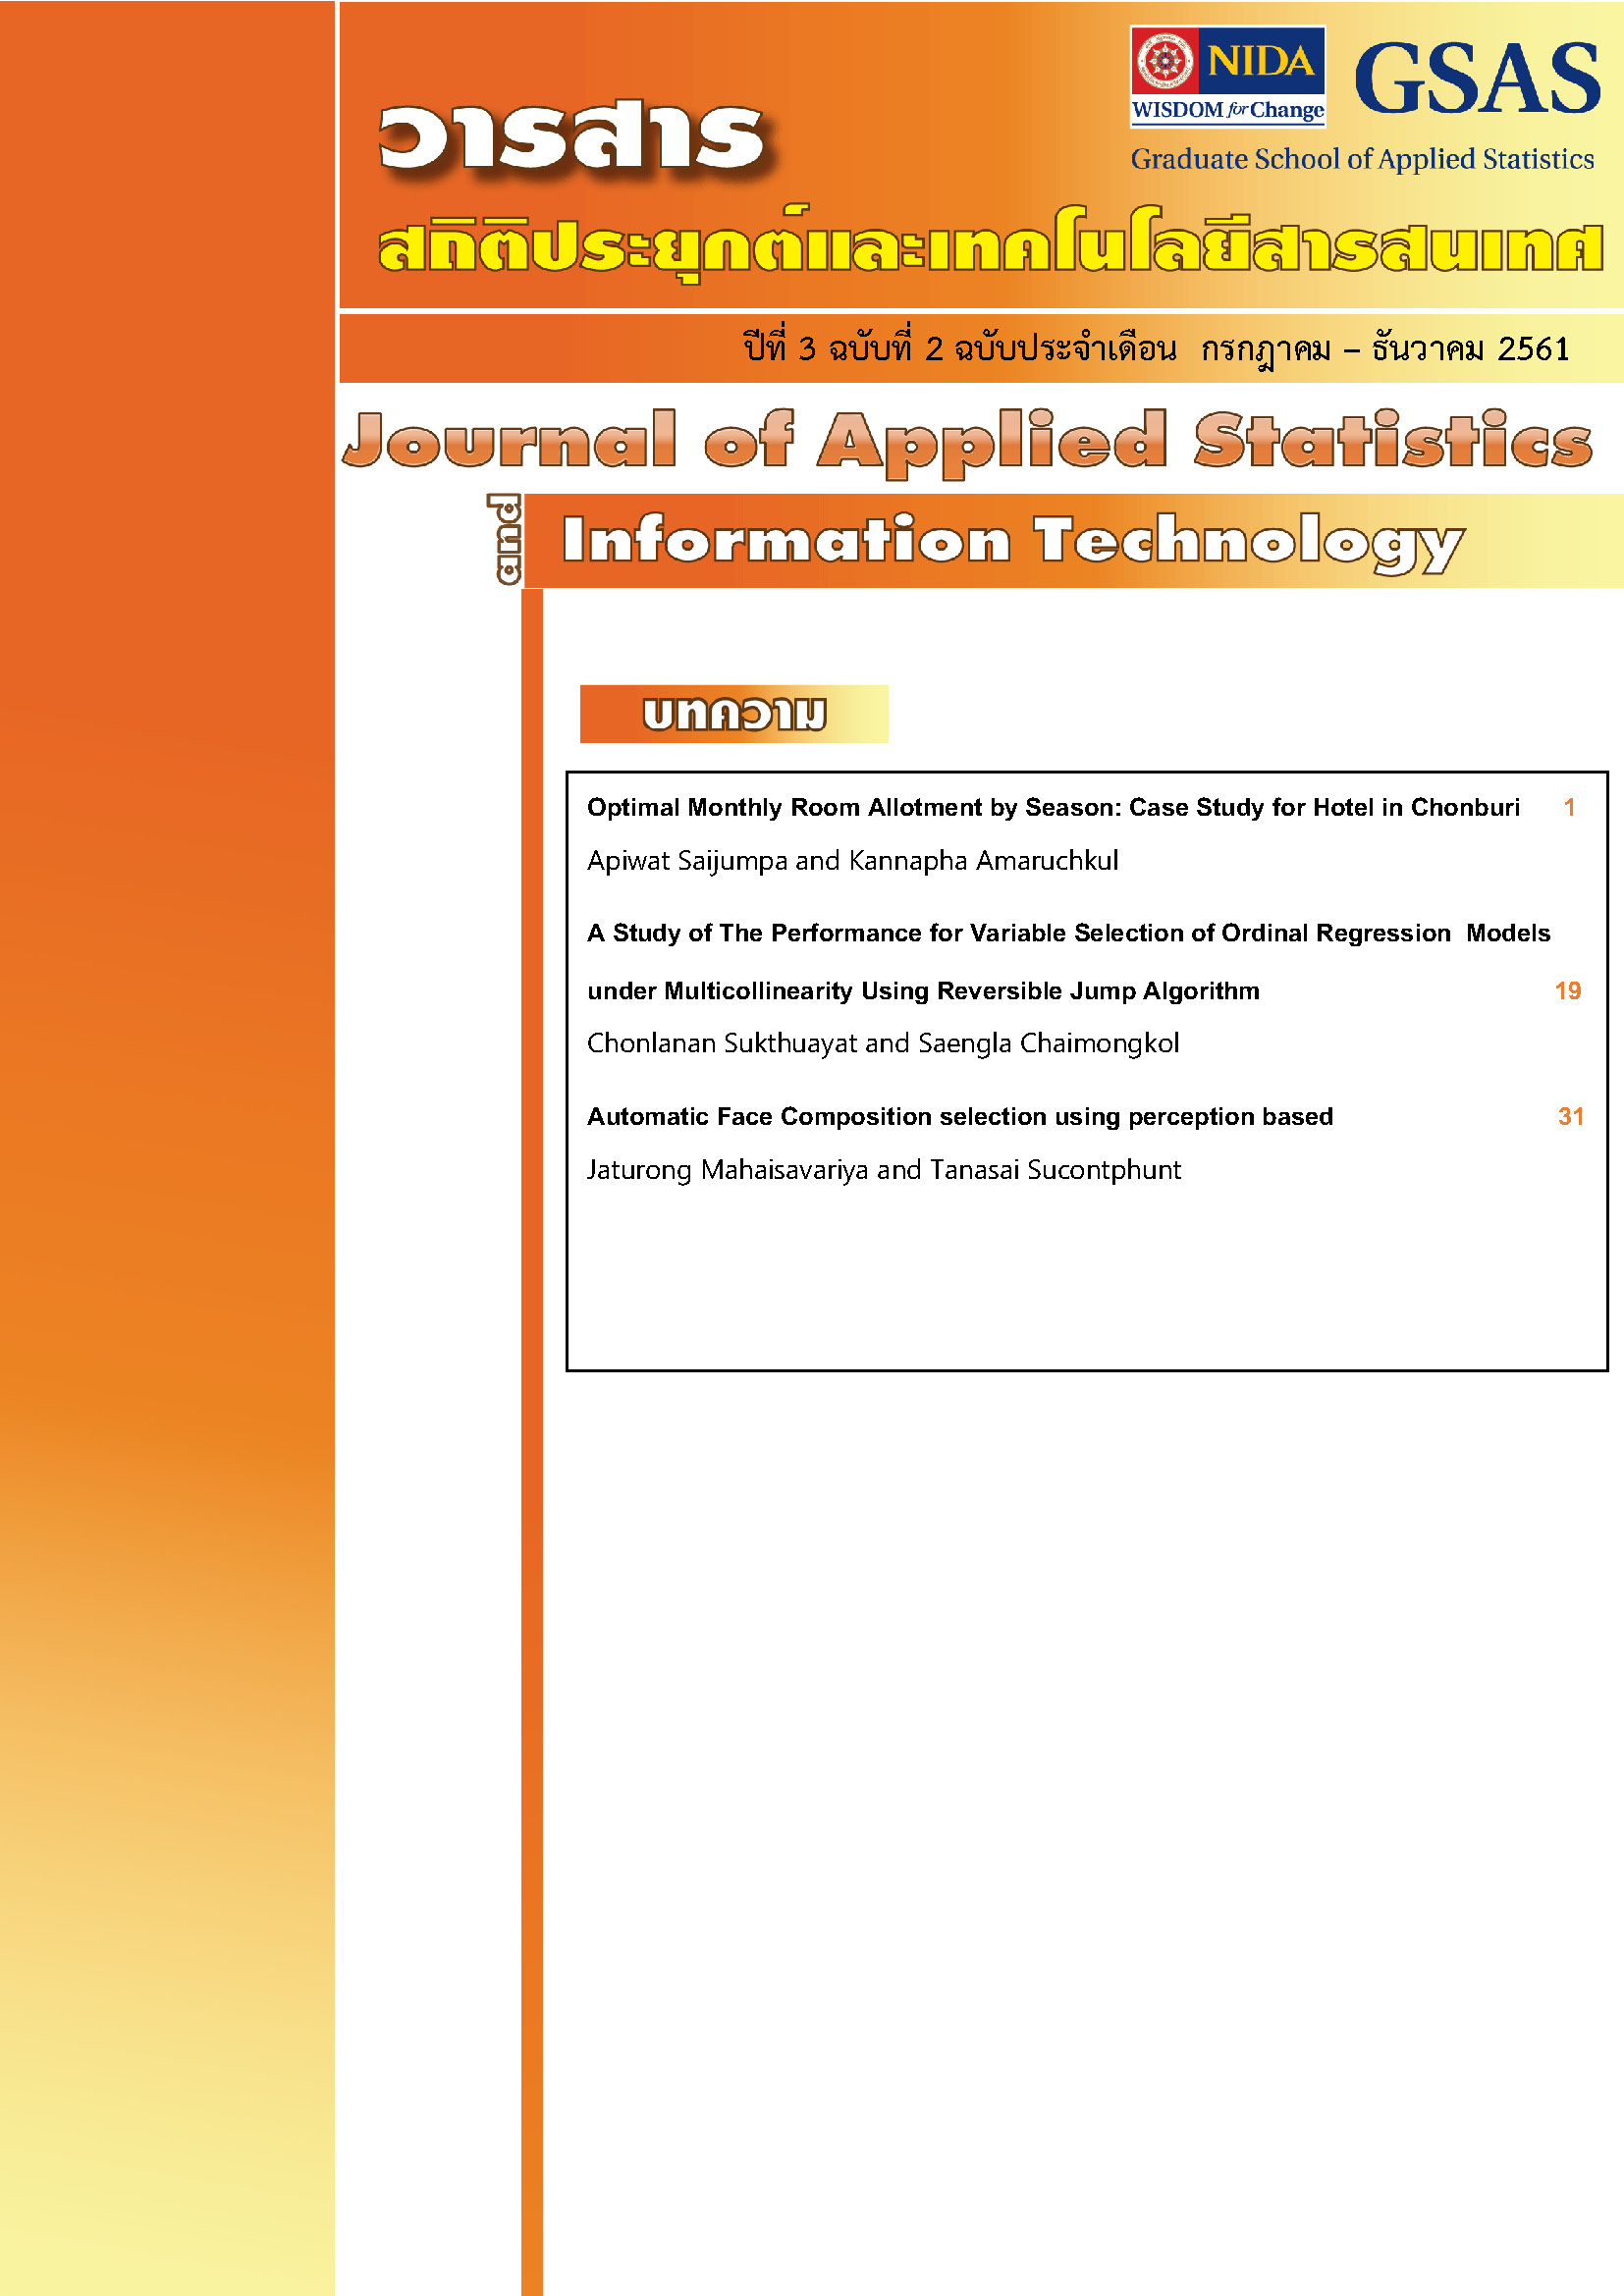 					View Vol. 3 No. 2 (2018): Journal of Applied Statistics and Information Technology Vol 3 No 2 (July - December 2018)
				